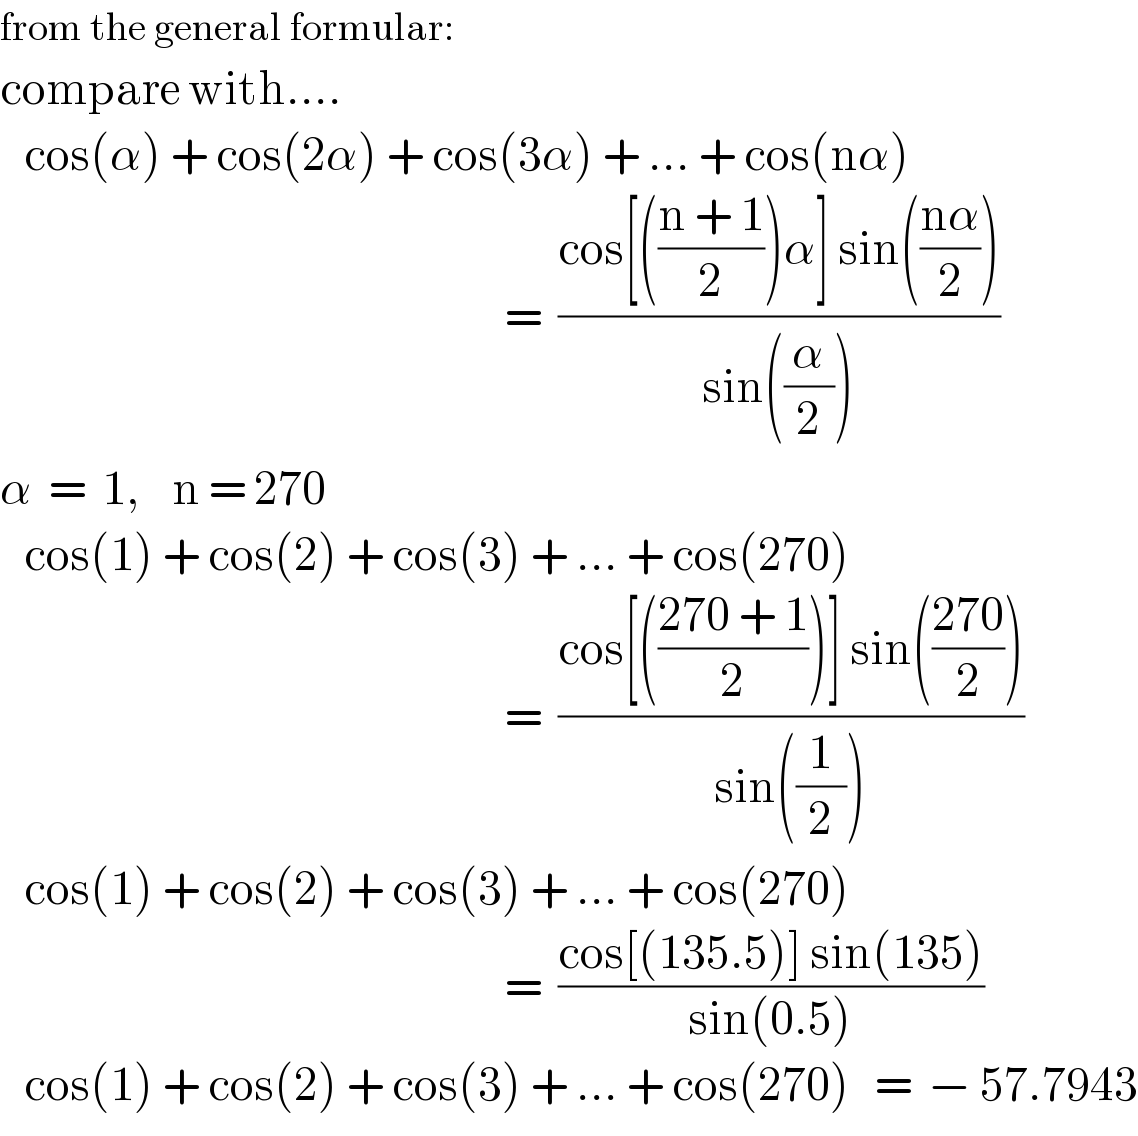 from the general formular:  compare with....     cos(α) + cos(2α) + cos(3α) + ... + cos(nα)                                                                 =  ((cos[(((n + 1)/2))α] sin(((nα)/2)))/(sin((α/2))))  α  =  1,    n = 270     cos(1) + cos(2) + cos(3) + ... + cos(270)                                                                 =  ((cos[(((270 + 1)/2))] sin(((270)/2)))/(sin((1/2))))     cos(1) + cos(2) + cos(3) + ... + cos(270)                                                                 =  ((cos[(135.5)] sin(135))/(sin(0.5)))     cos(1) + cos(2) + cos(3) + ... + cos(270)   =  − 57.7943  